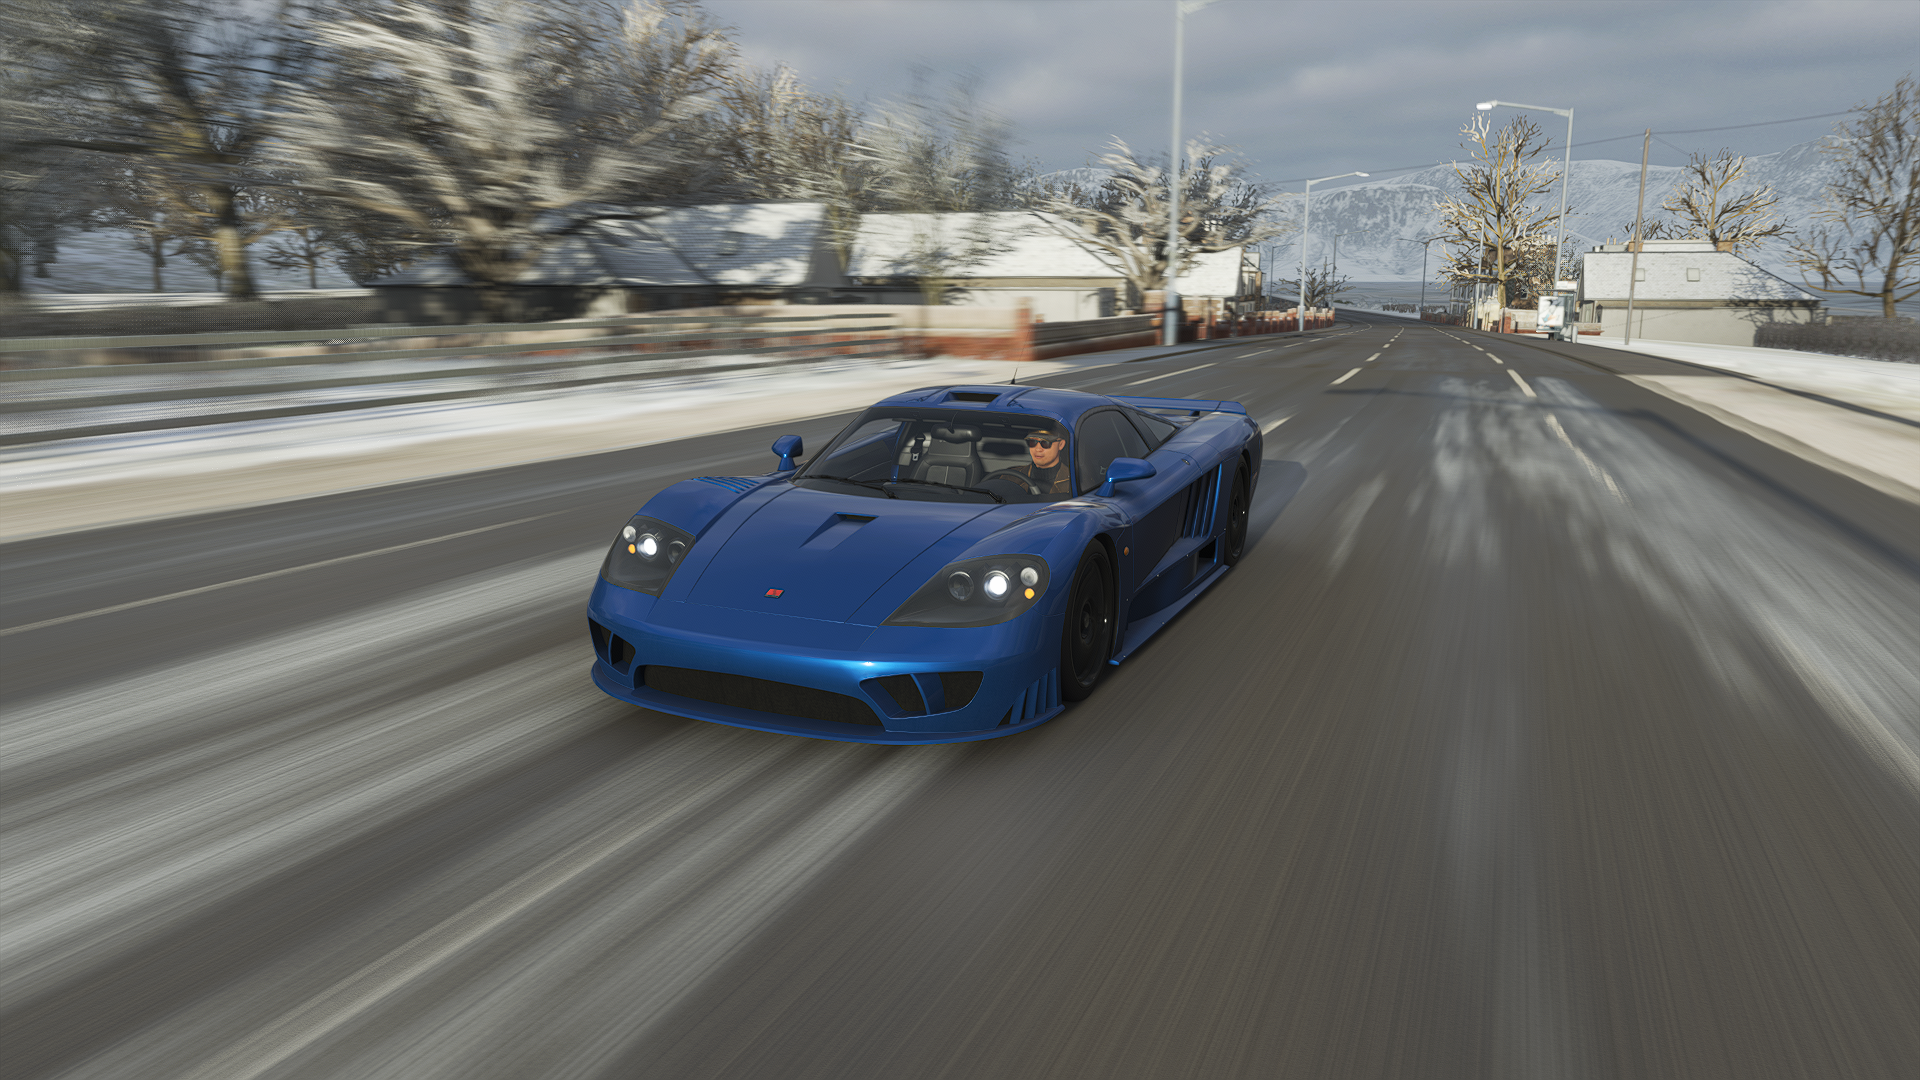 General 1920x1080 Forza Horizon 4 Forza Horizon Forza driving CGI car supercars Saleen S7 video games vehicle frontal view headlights trees snow road blurred blurry background clouds sky street light